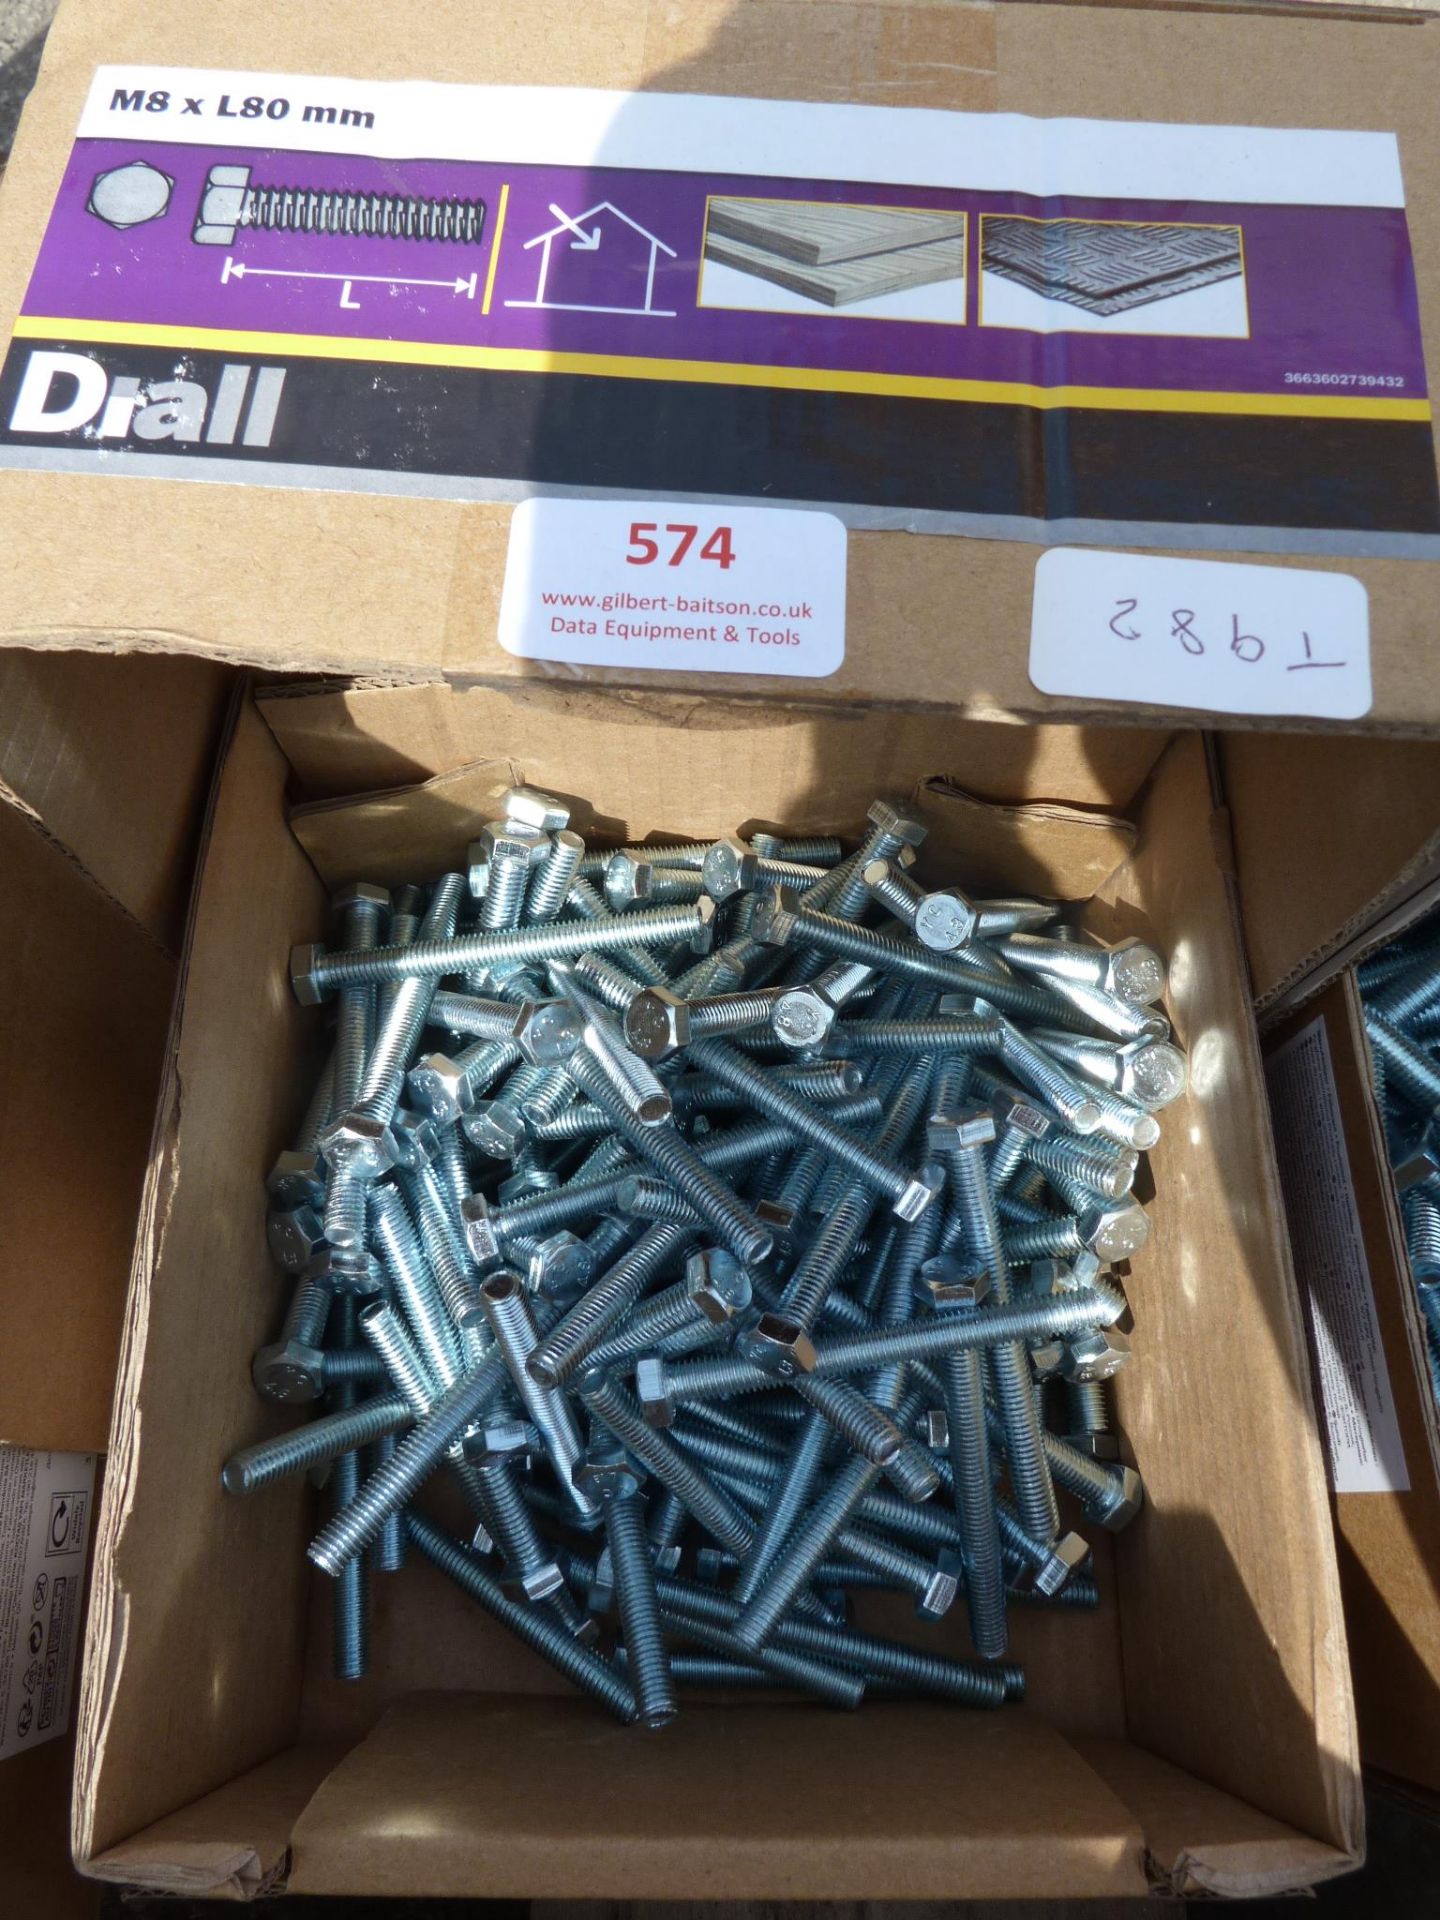 4kg of M8xL80mm Diall Hex Bolts